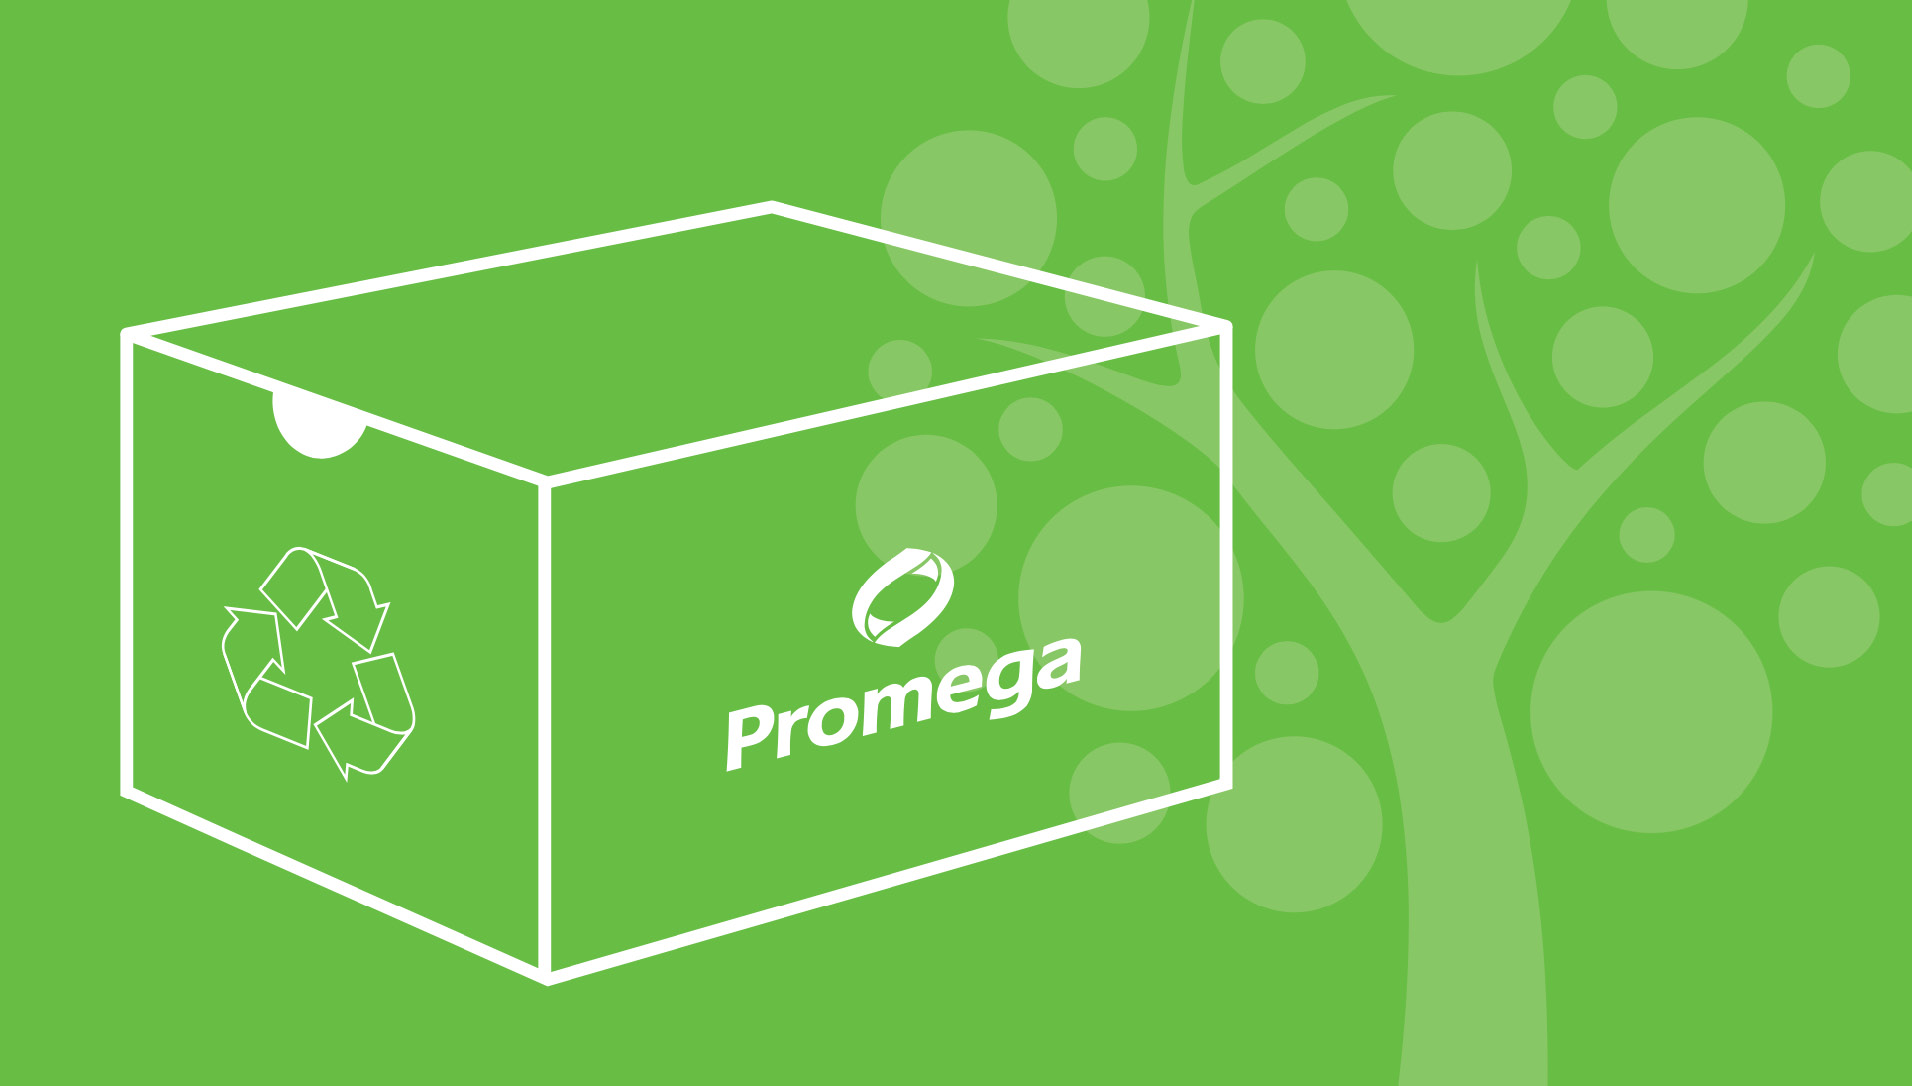 A cartoon image of a green Promega box sits in front of a green background